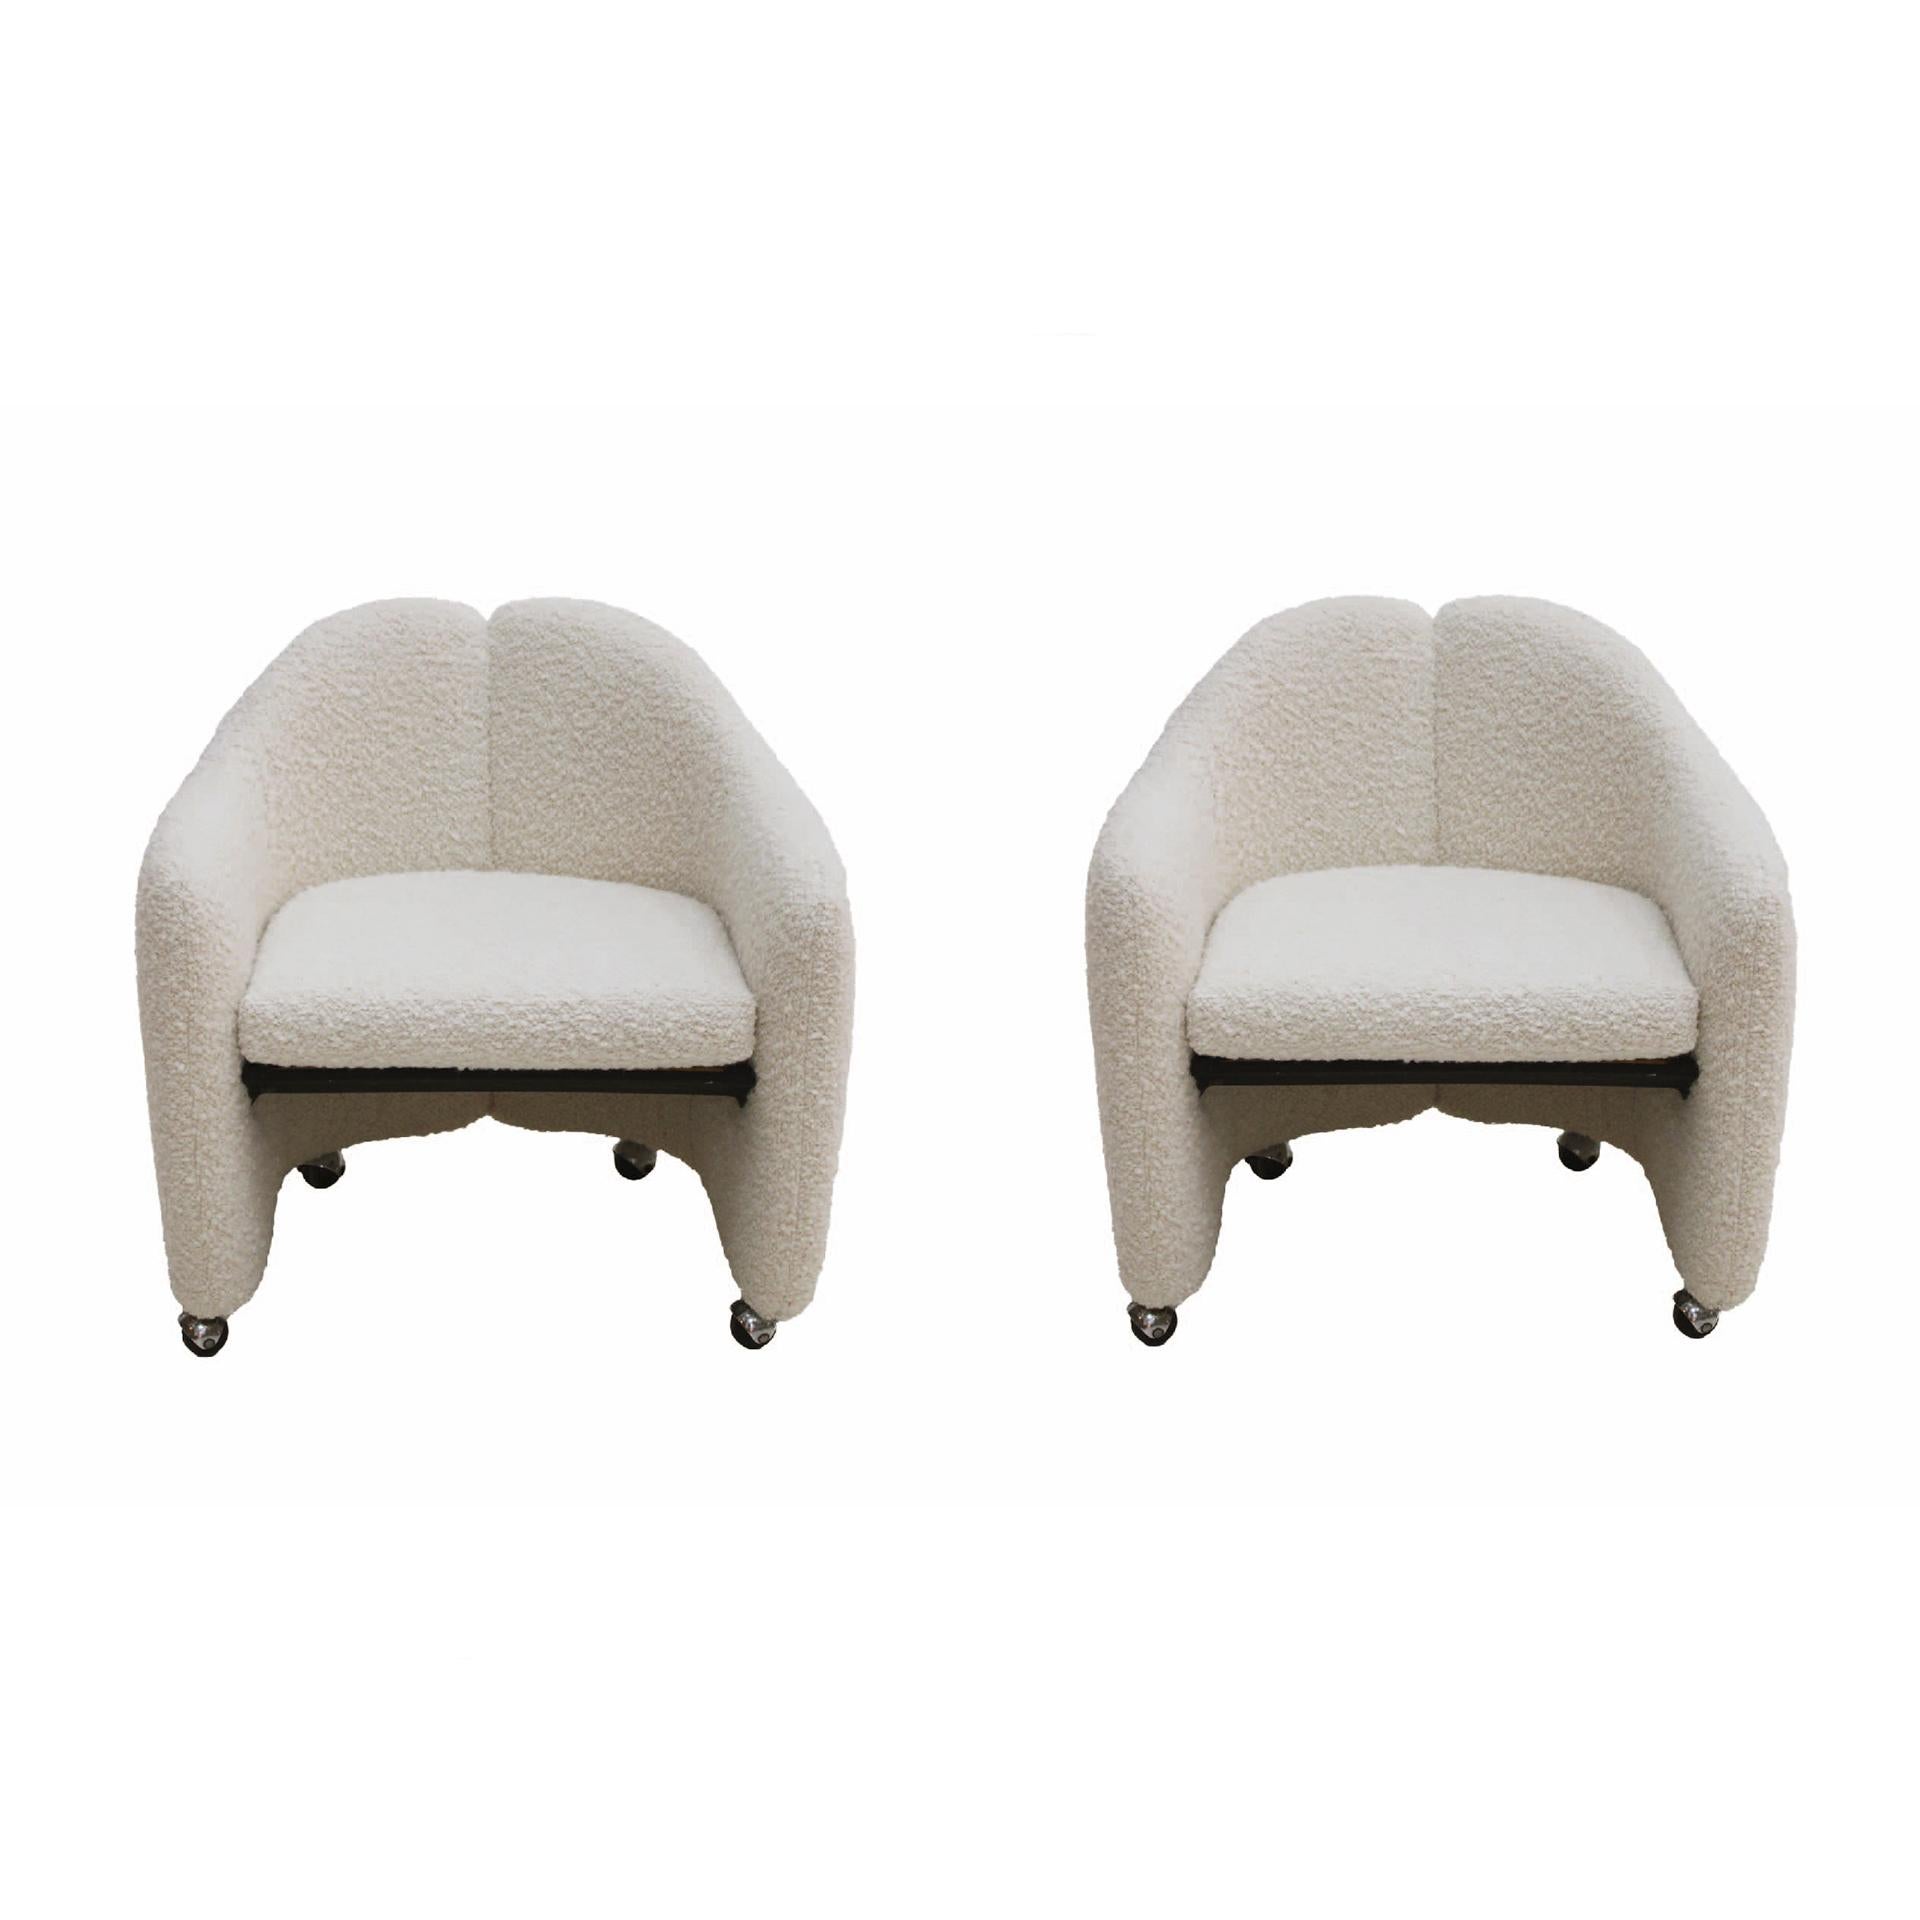 Pair of two PS 142 chairs designed by Eugenio Gerli and produced by Tecno. Structure made of solid metal and upholstered with white bouclé wool. Italy 1960s. Tecno Milano label.

Measurements: W 70 x D 64 x H 42/67 cm

Every item LA Studio offers is